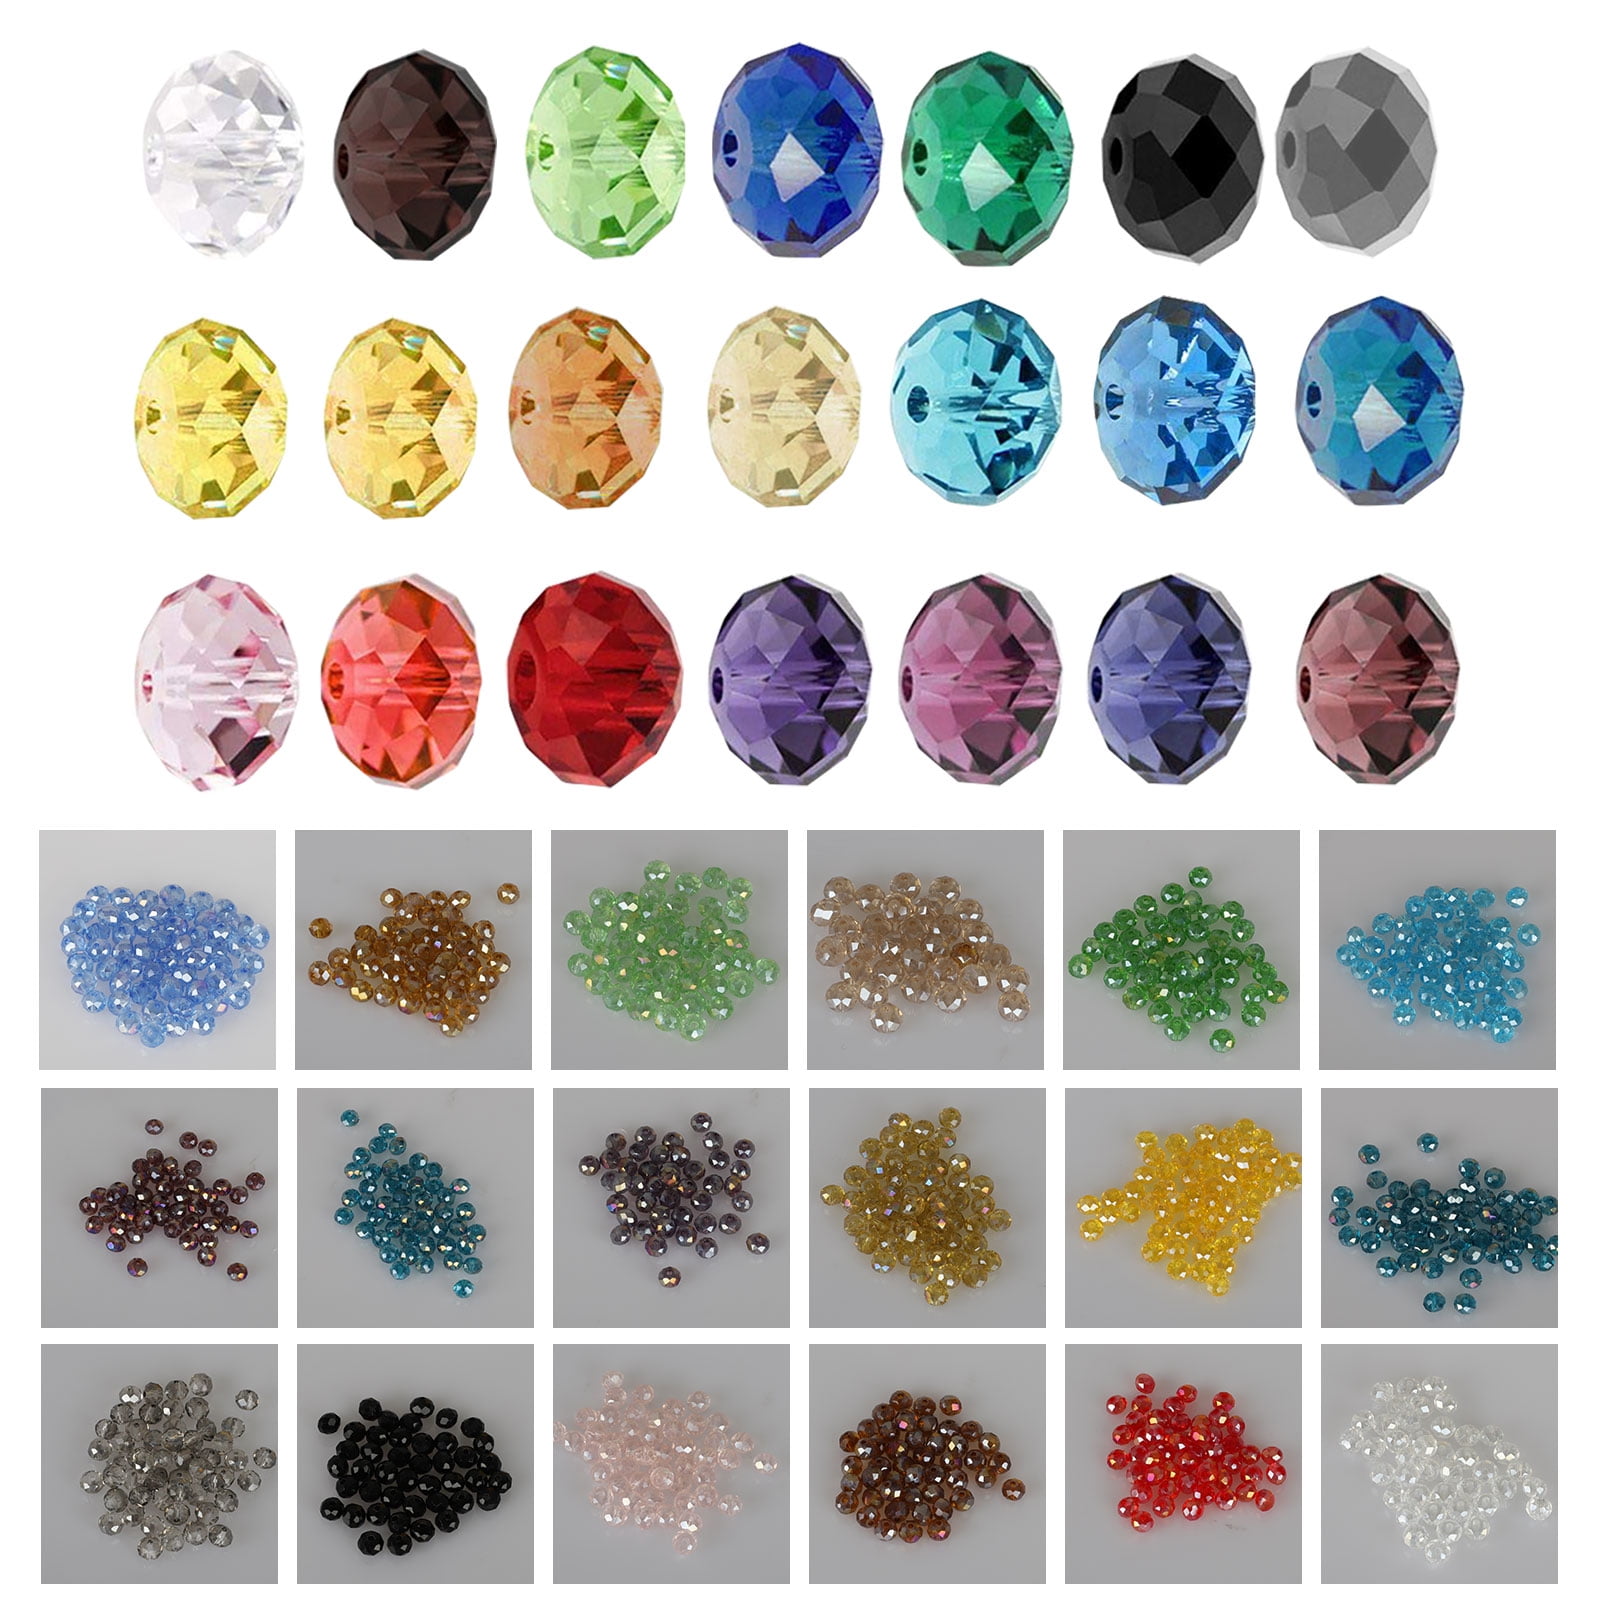 8x6mm 25pcs Rugby Crystal Faceted Oval Glass Beads Spacer Jewelry Making Finding 